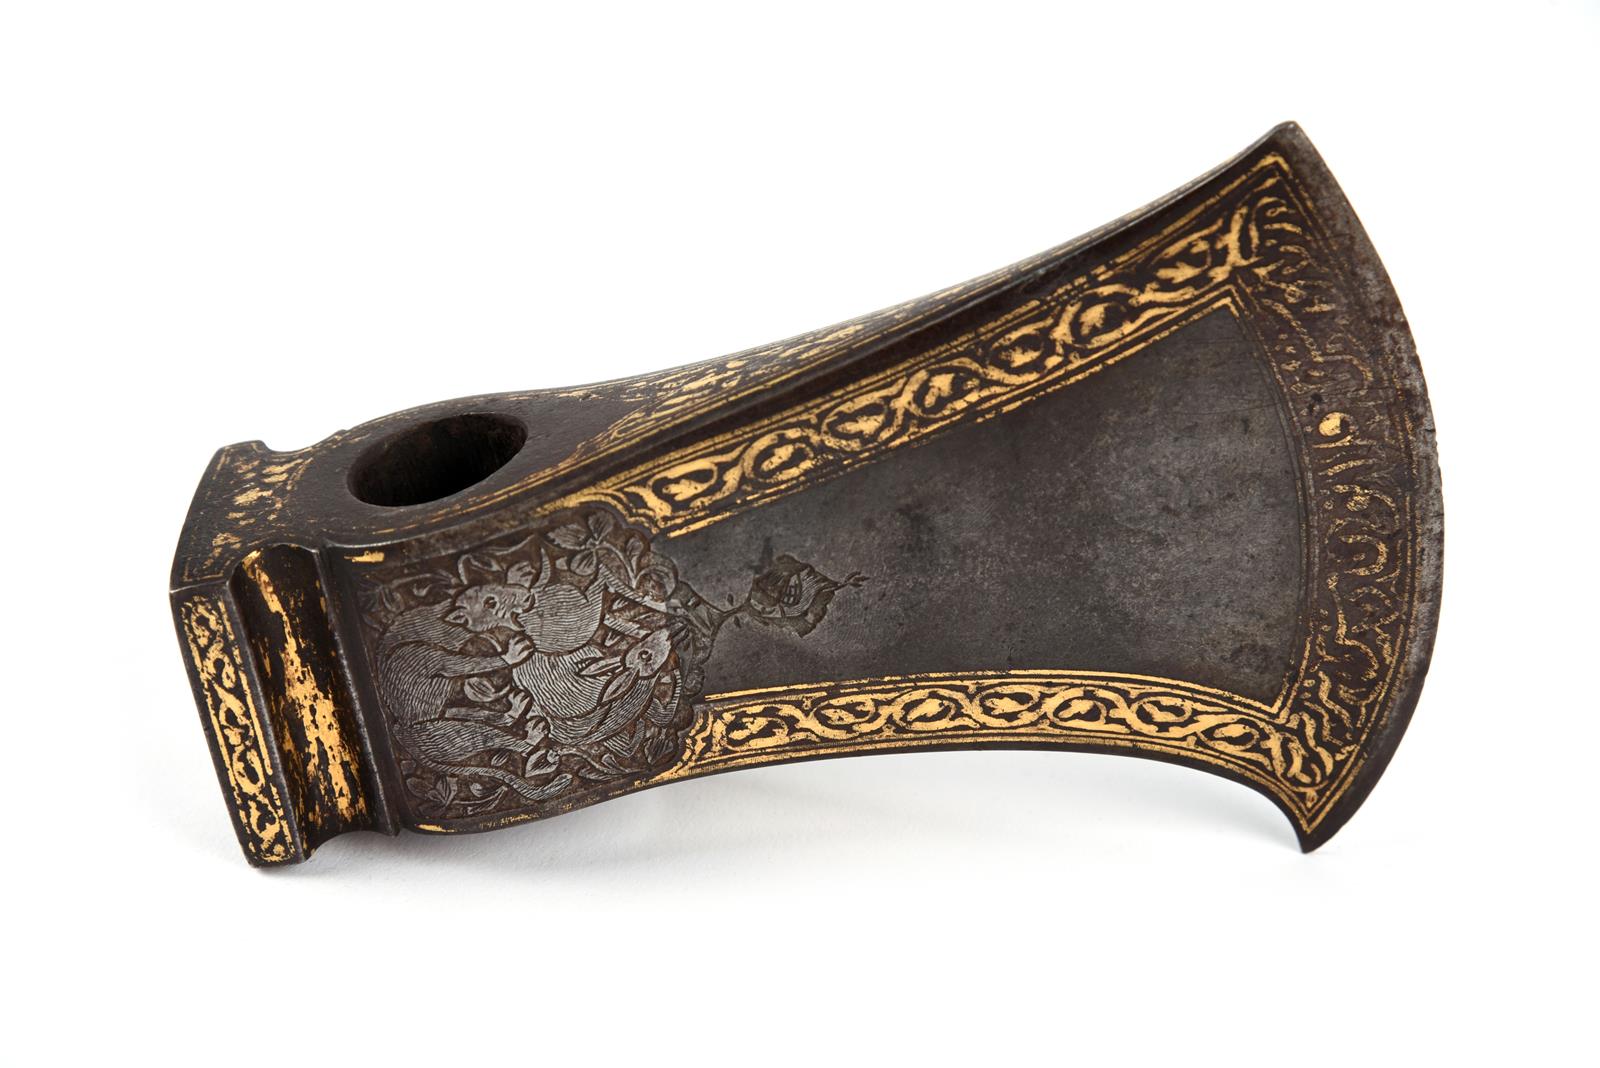 A fine Persian axe head (tabor), of watered steel with gold koftgari borders, the sides and back